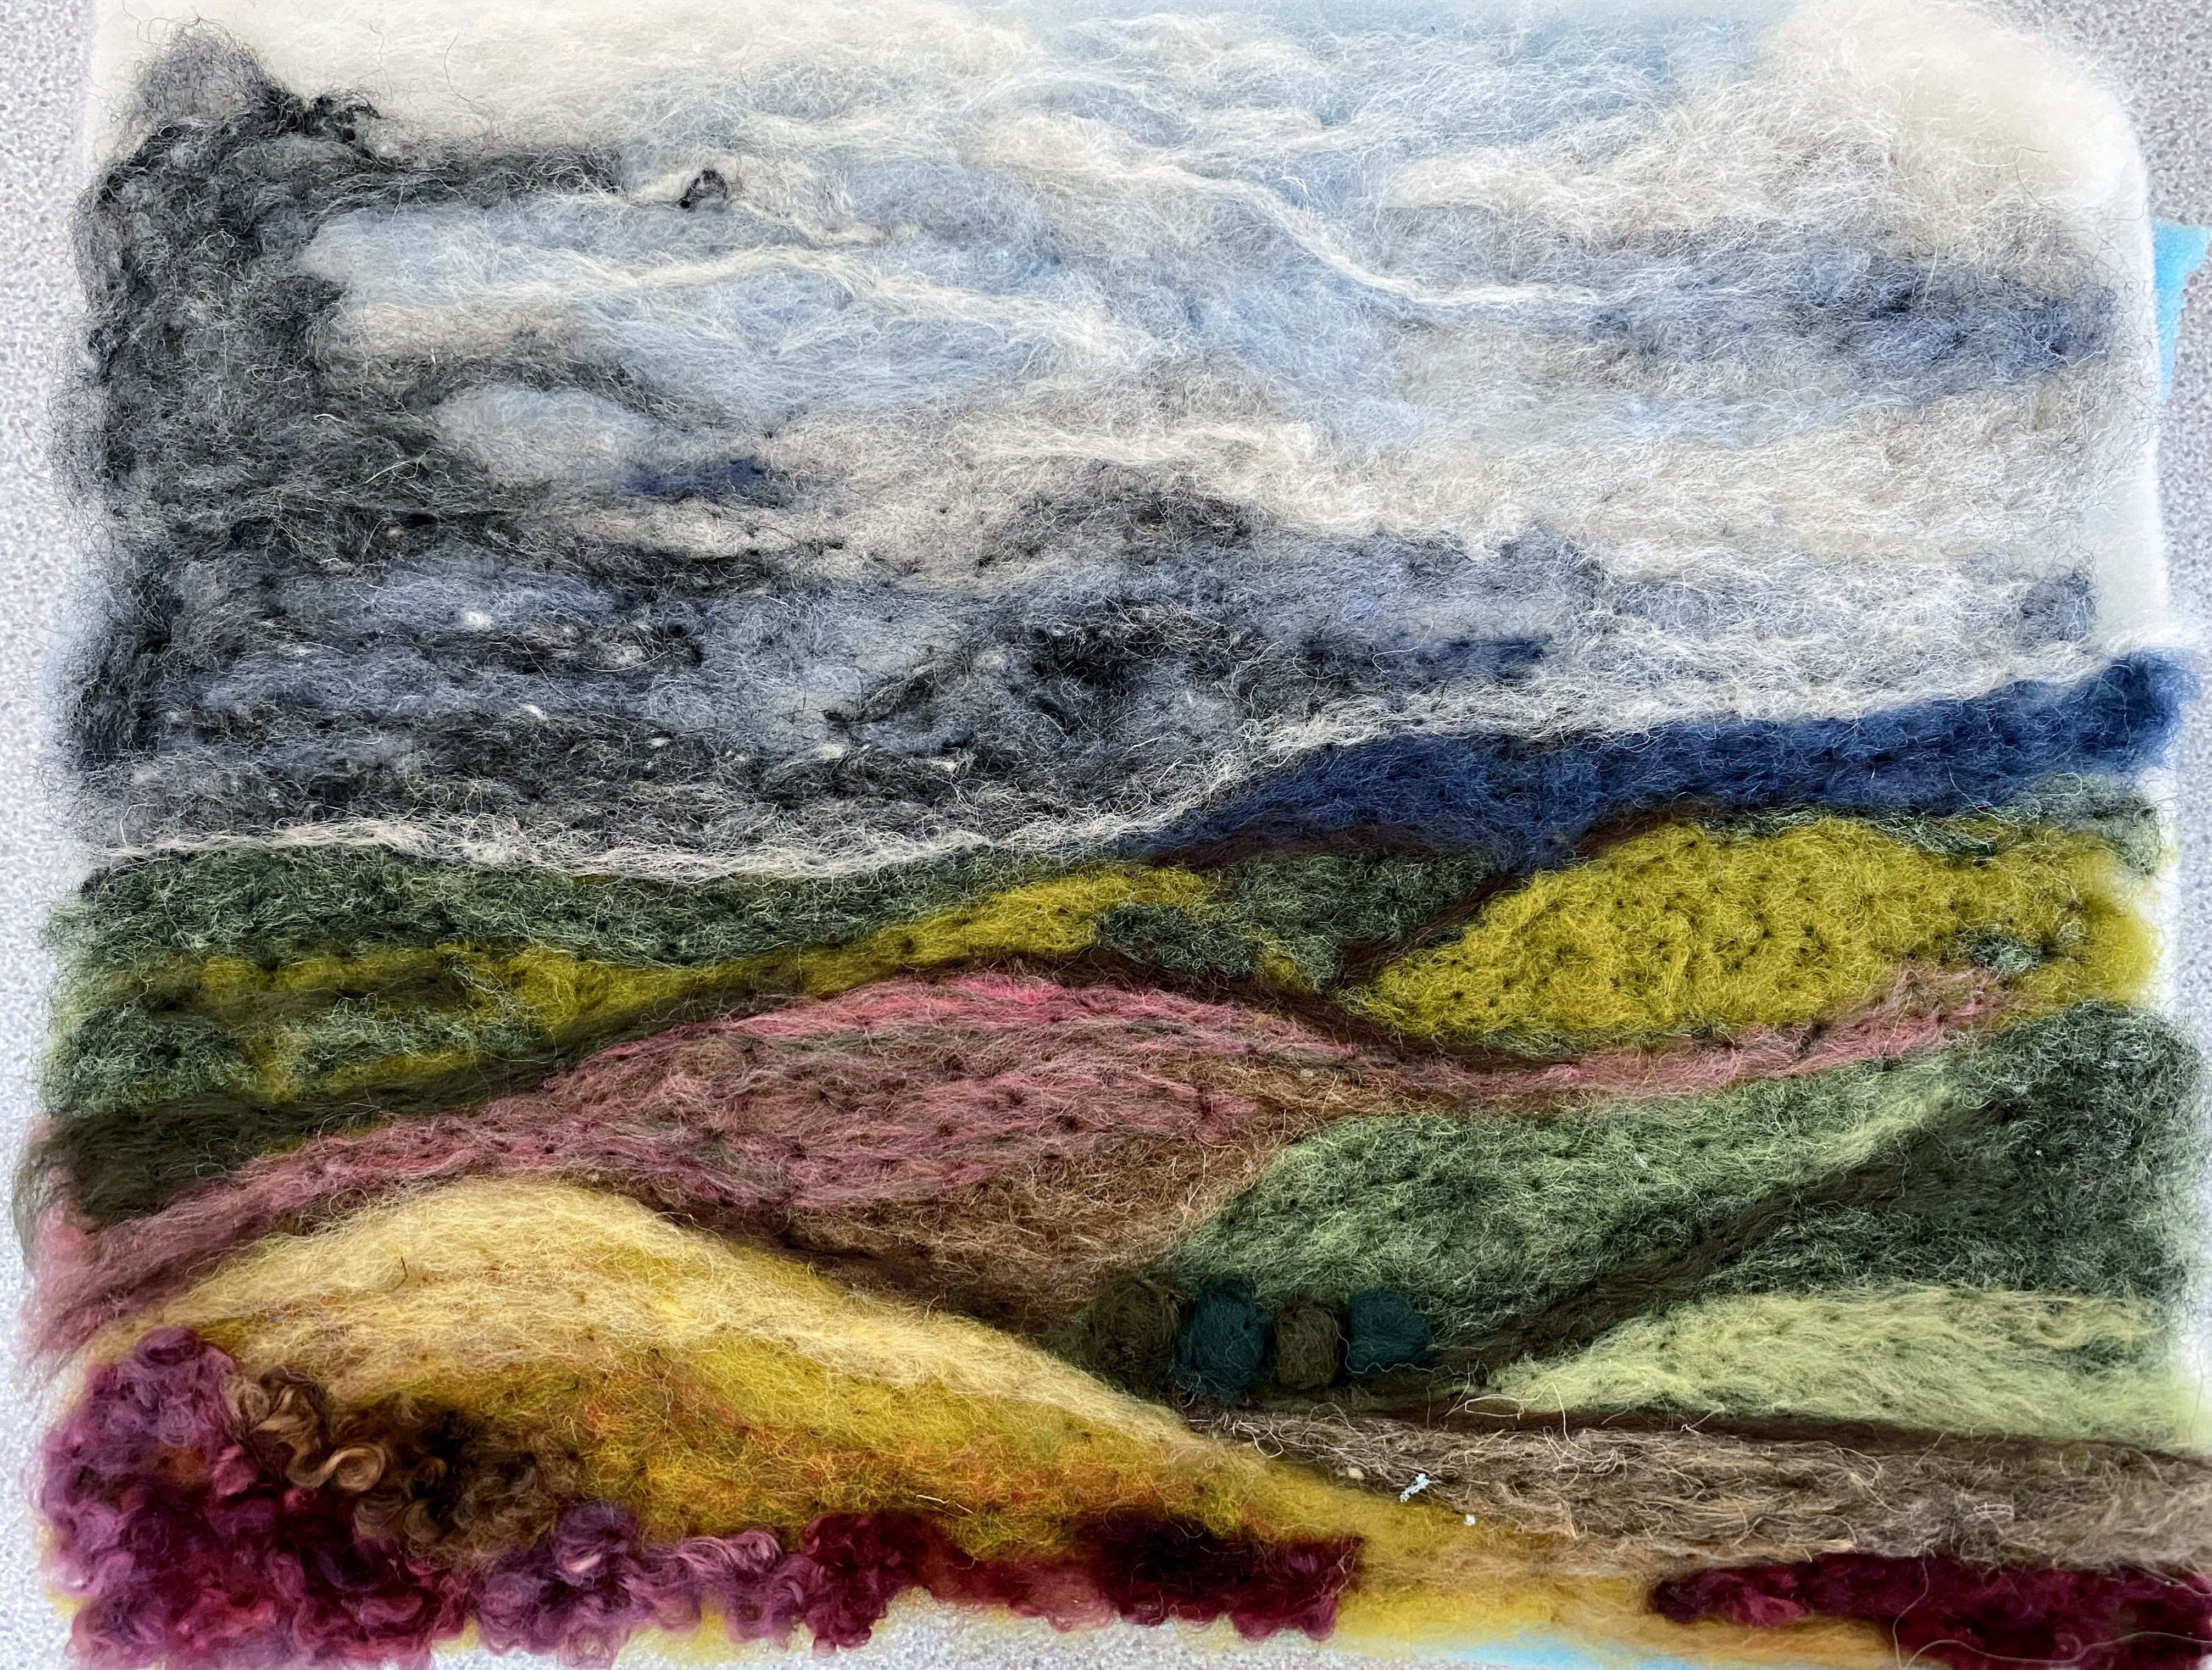 student's work at "Dry Felt Landscape" workshop by Nicola Hulme, May 2022